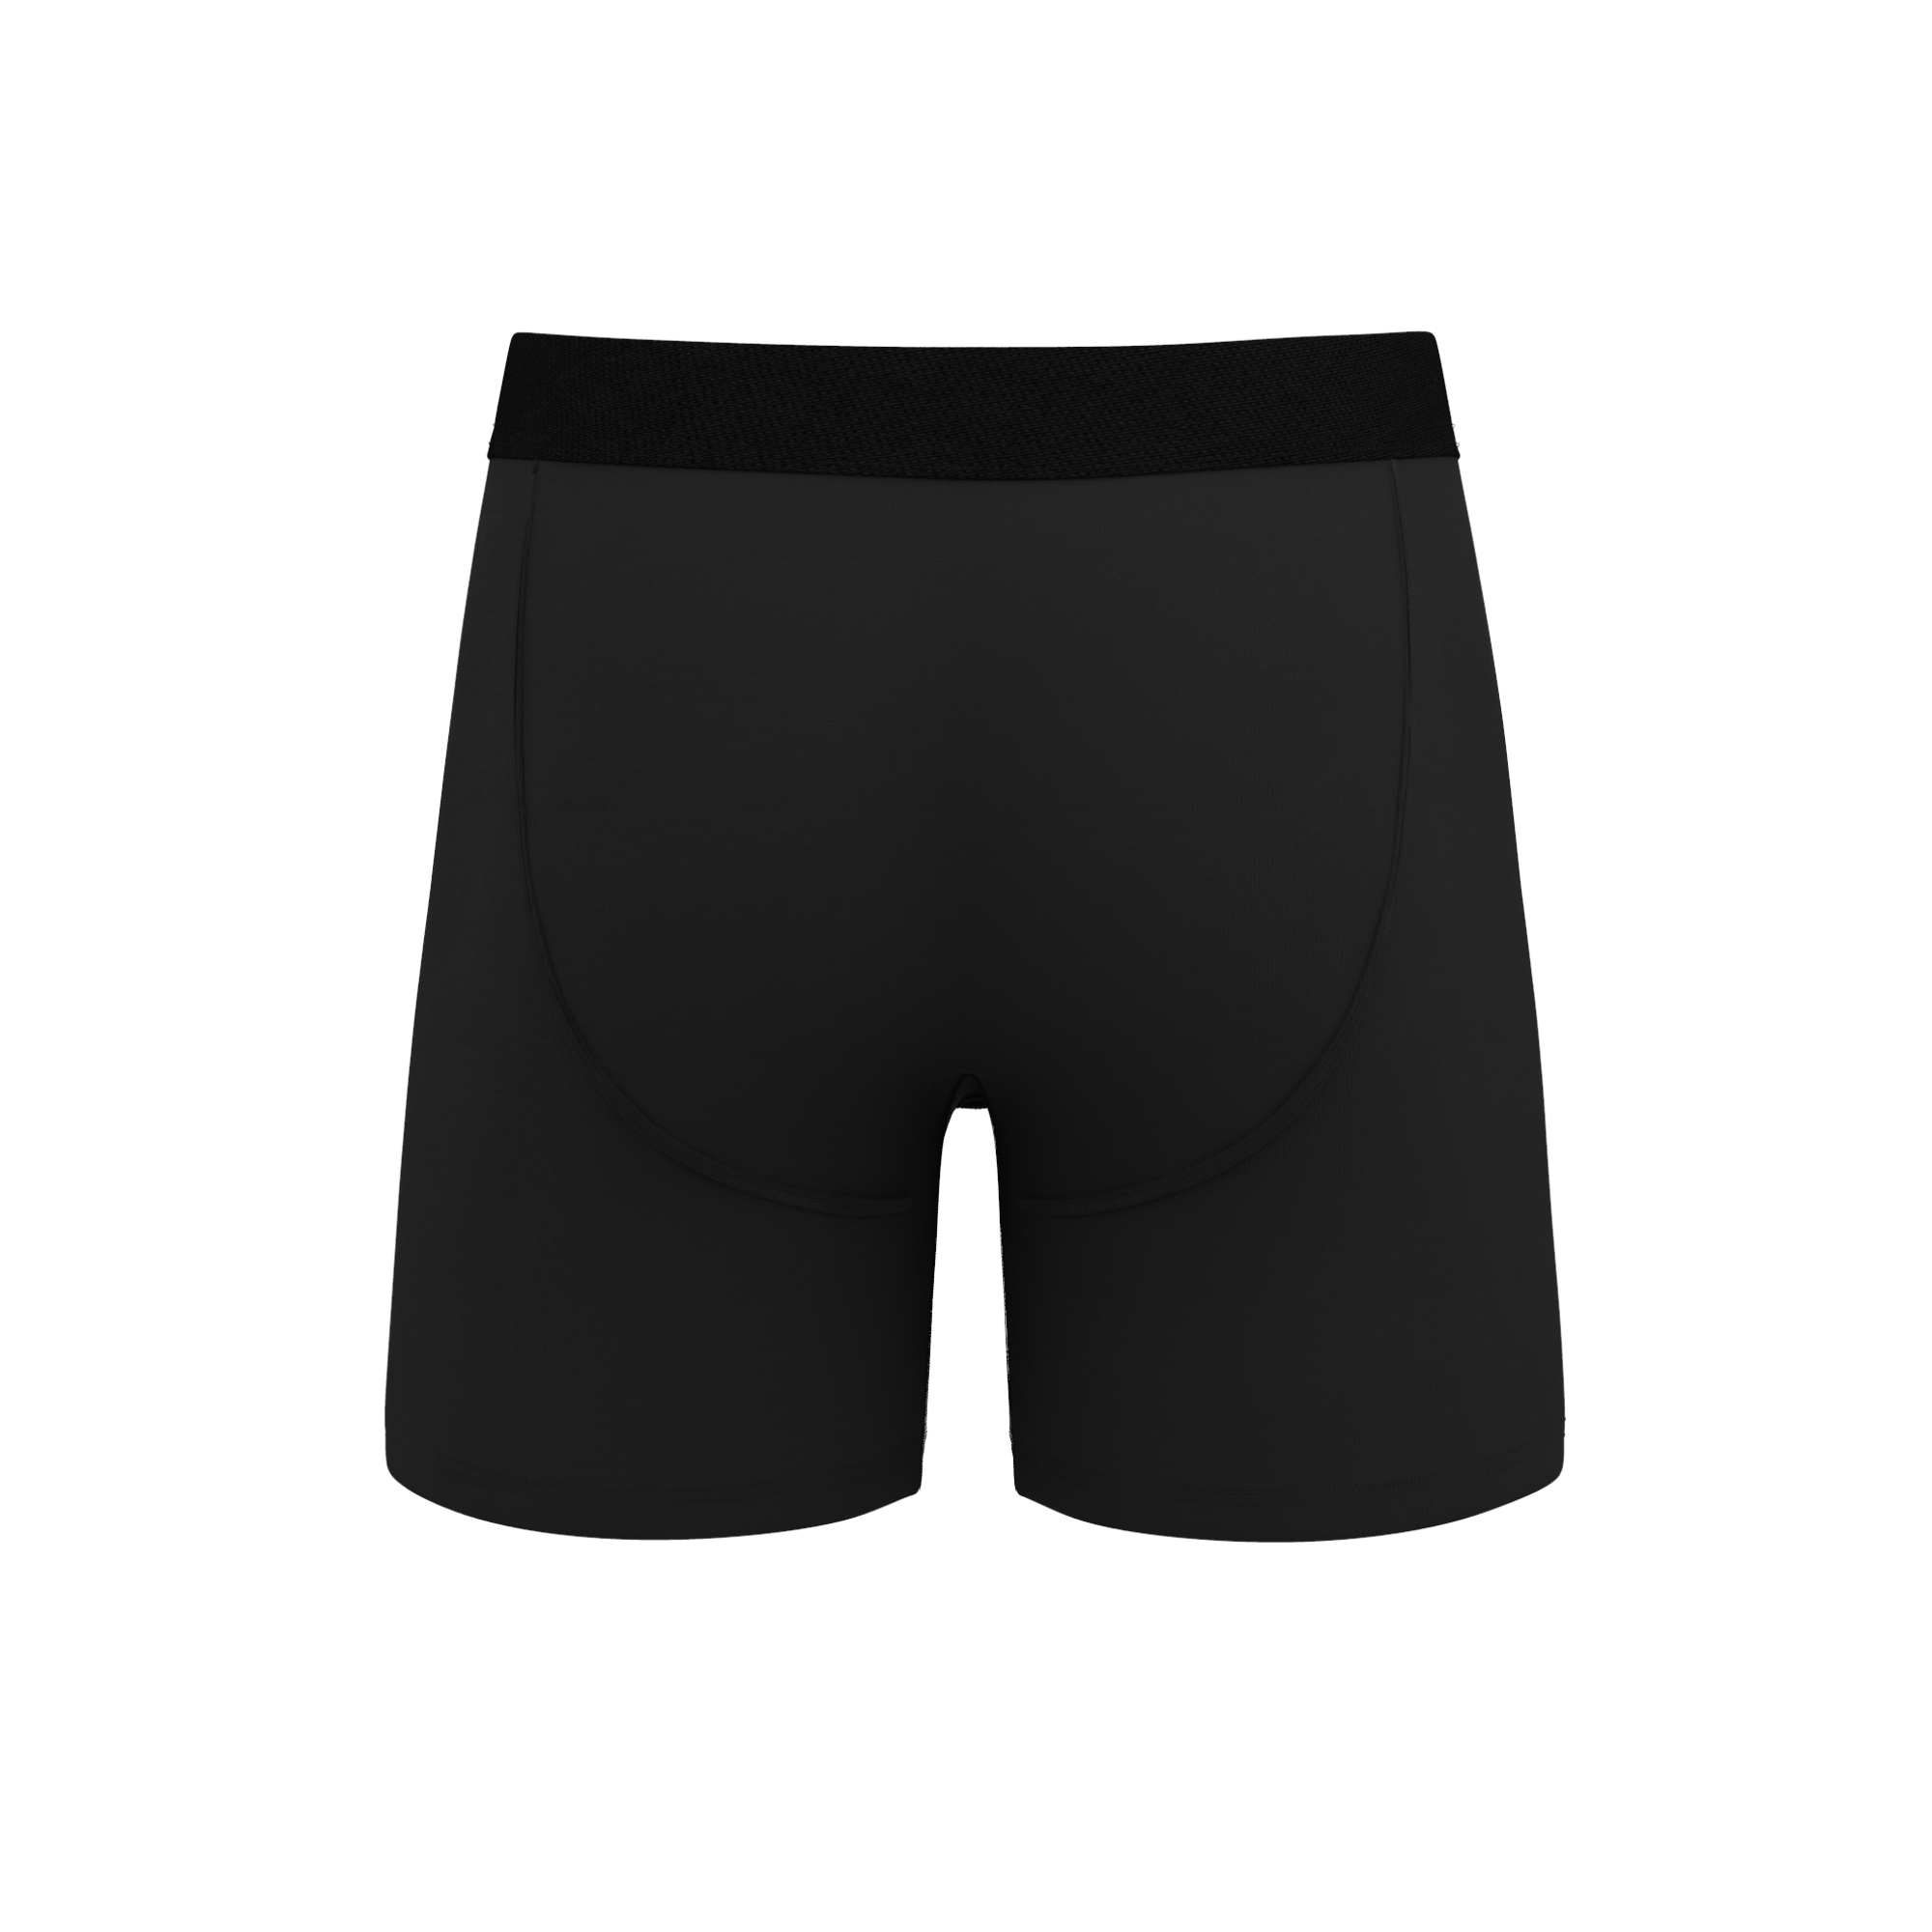 Shinesty® The Down To Shuck Stretch Boxer Briefs - Men's Boxers in